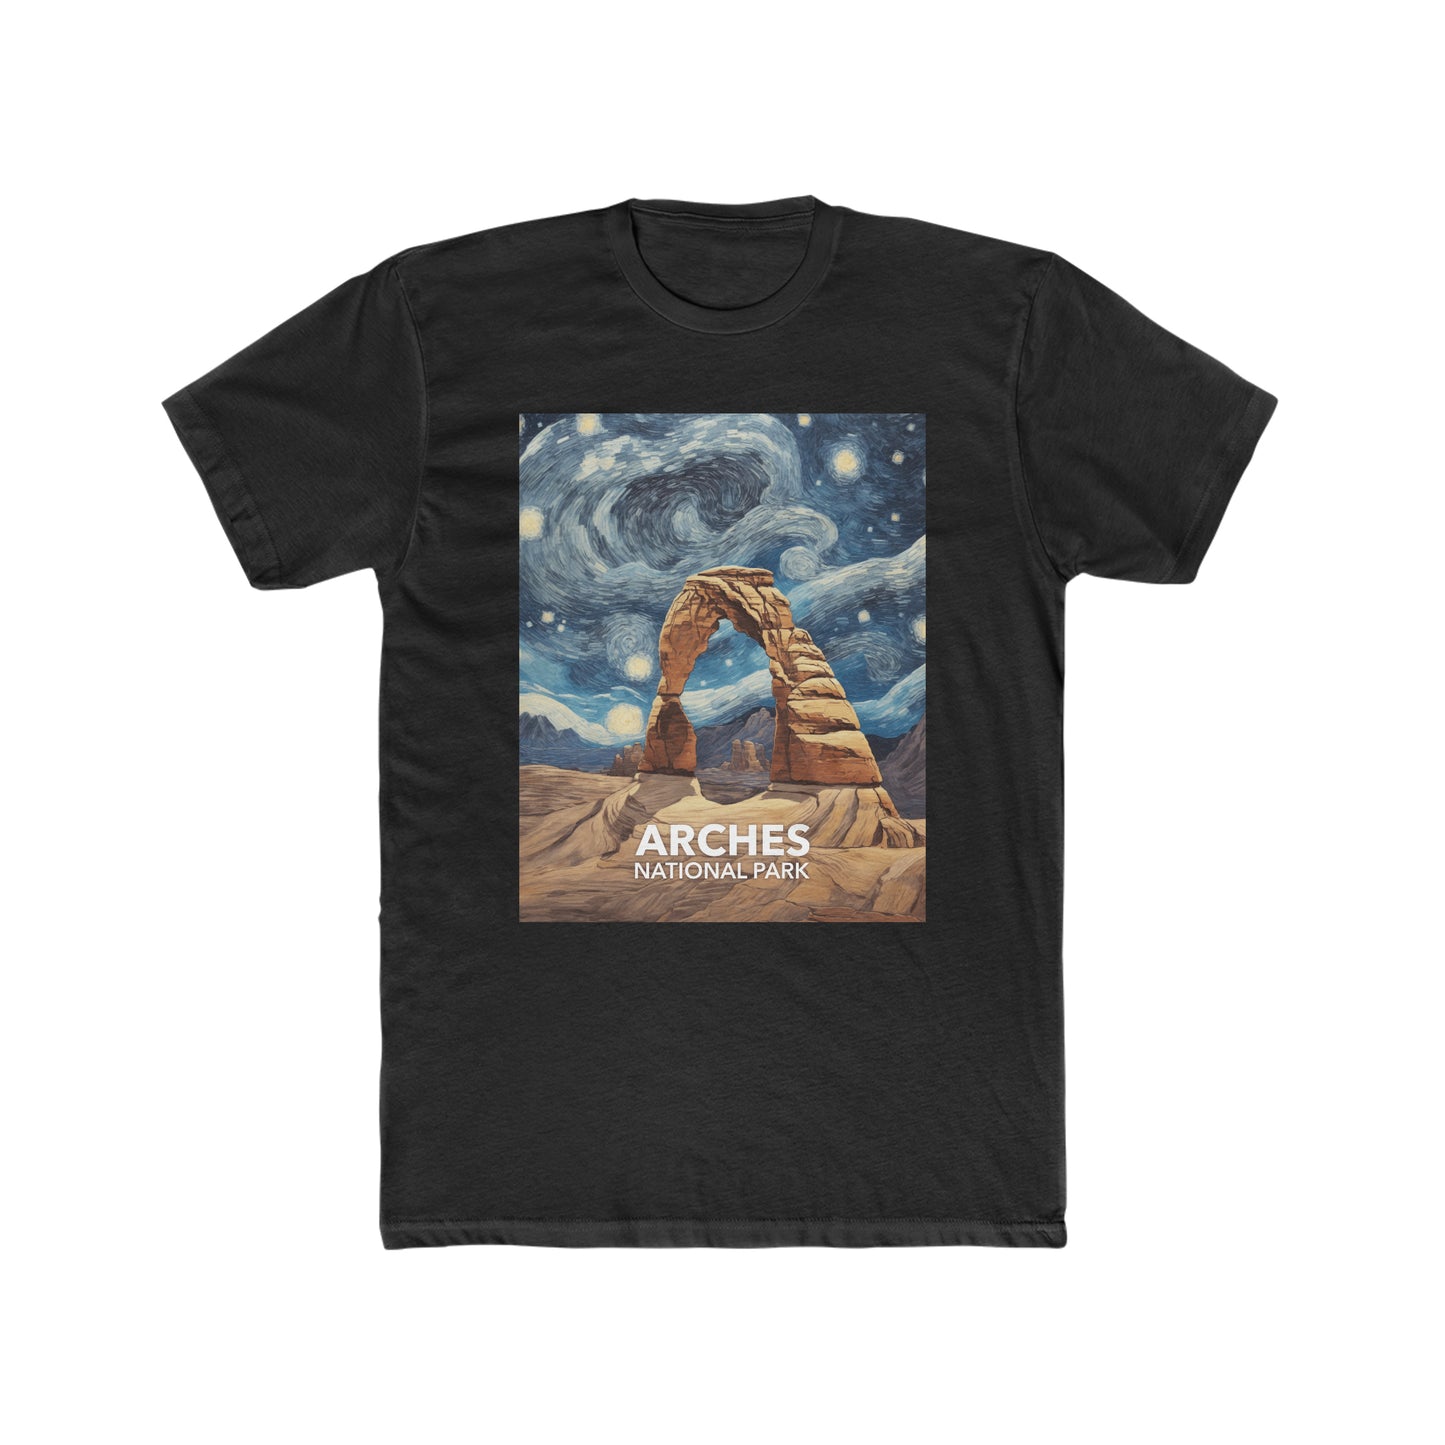 Arches National Park T-Shirt - The Starry Night